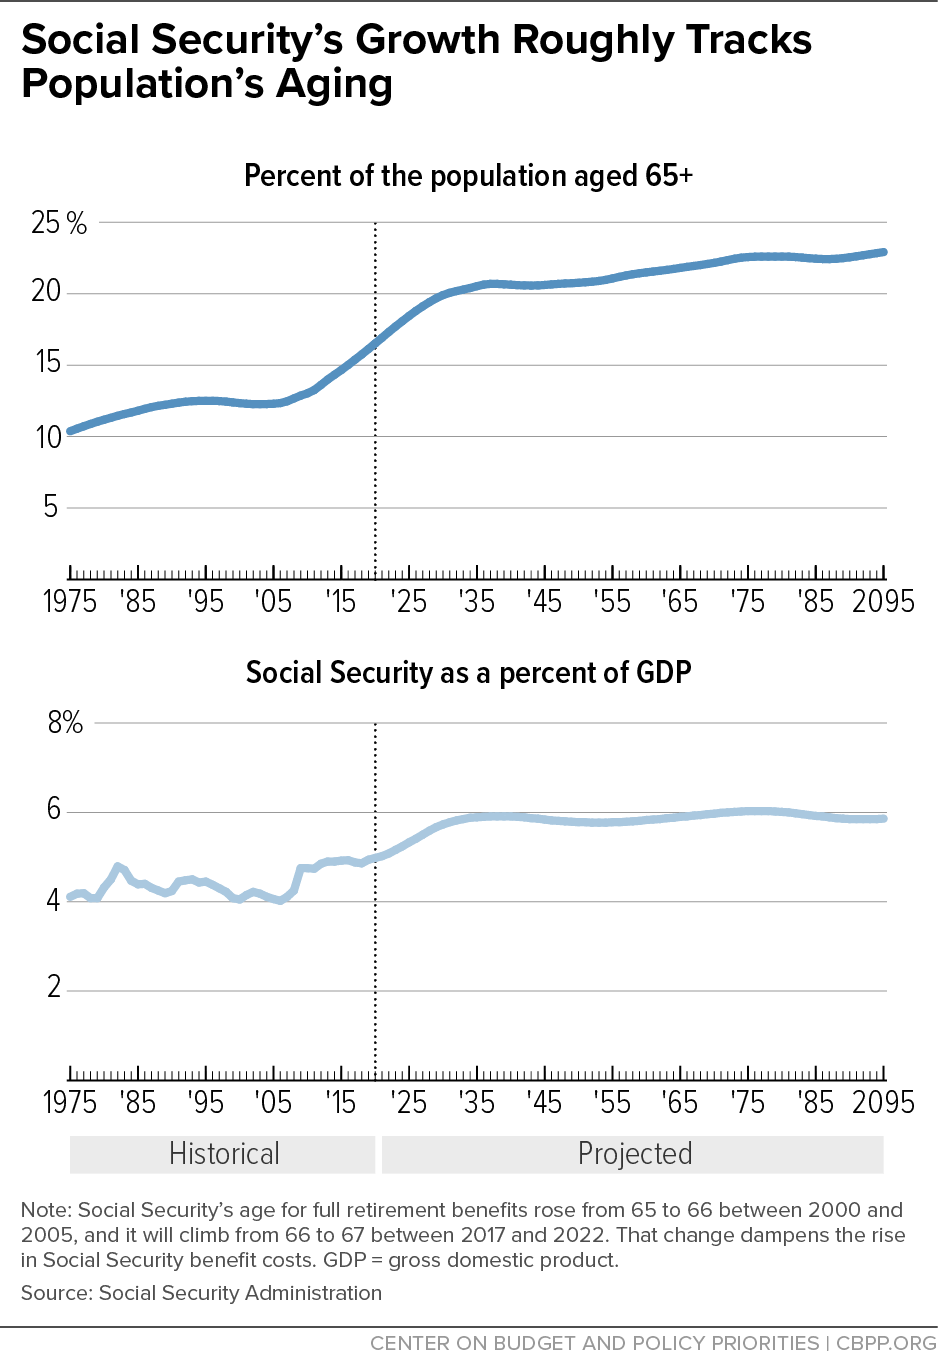 Social Security’s Growth Roughly Tracks Population’s Aging